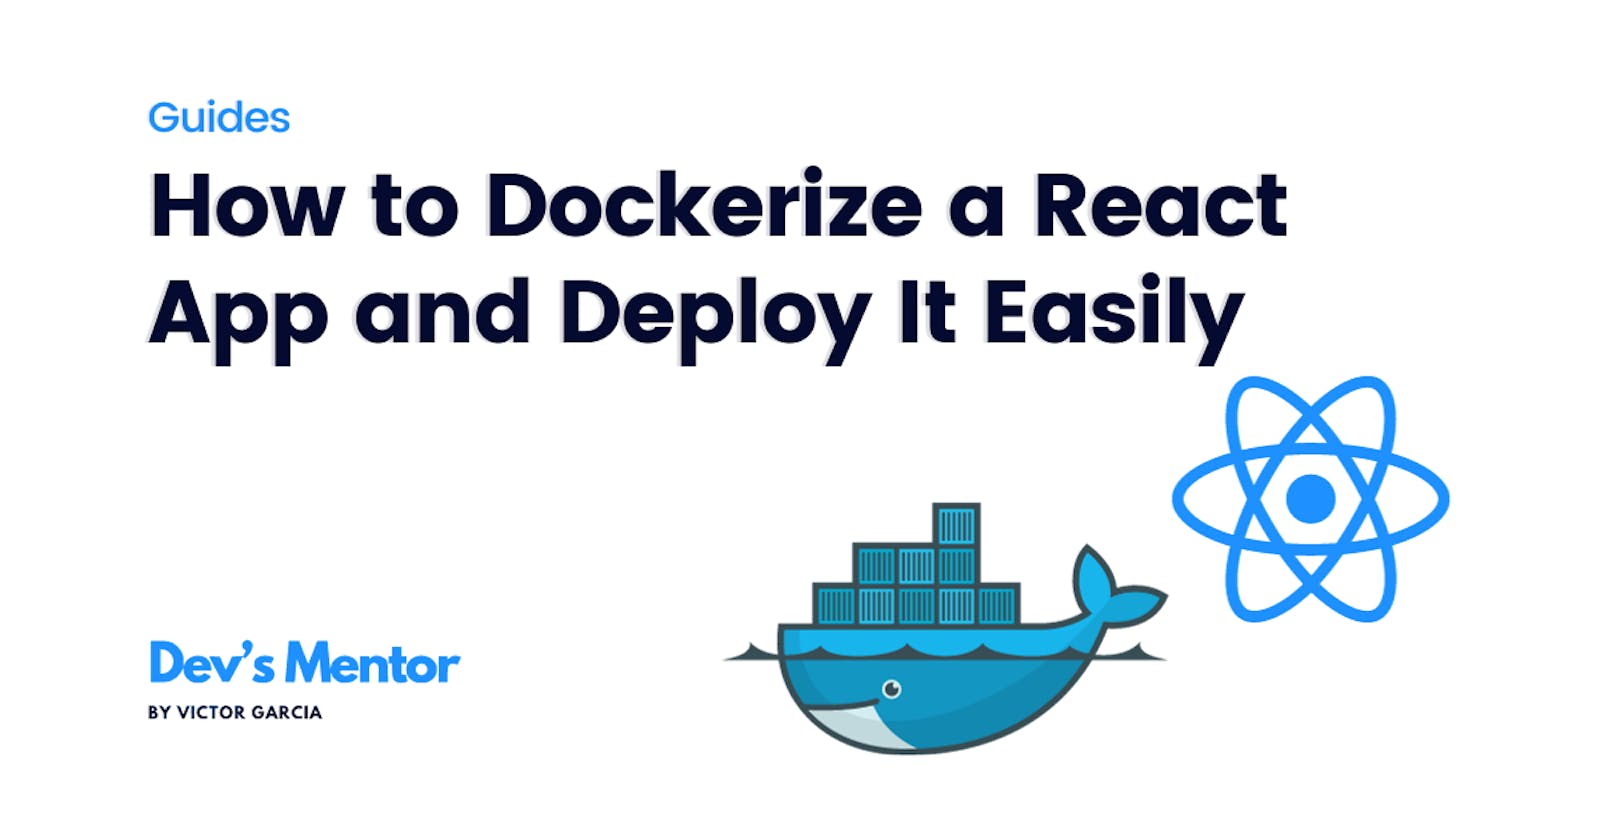 How to Dockerize a React App and Deploy It Easily